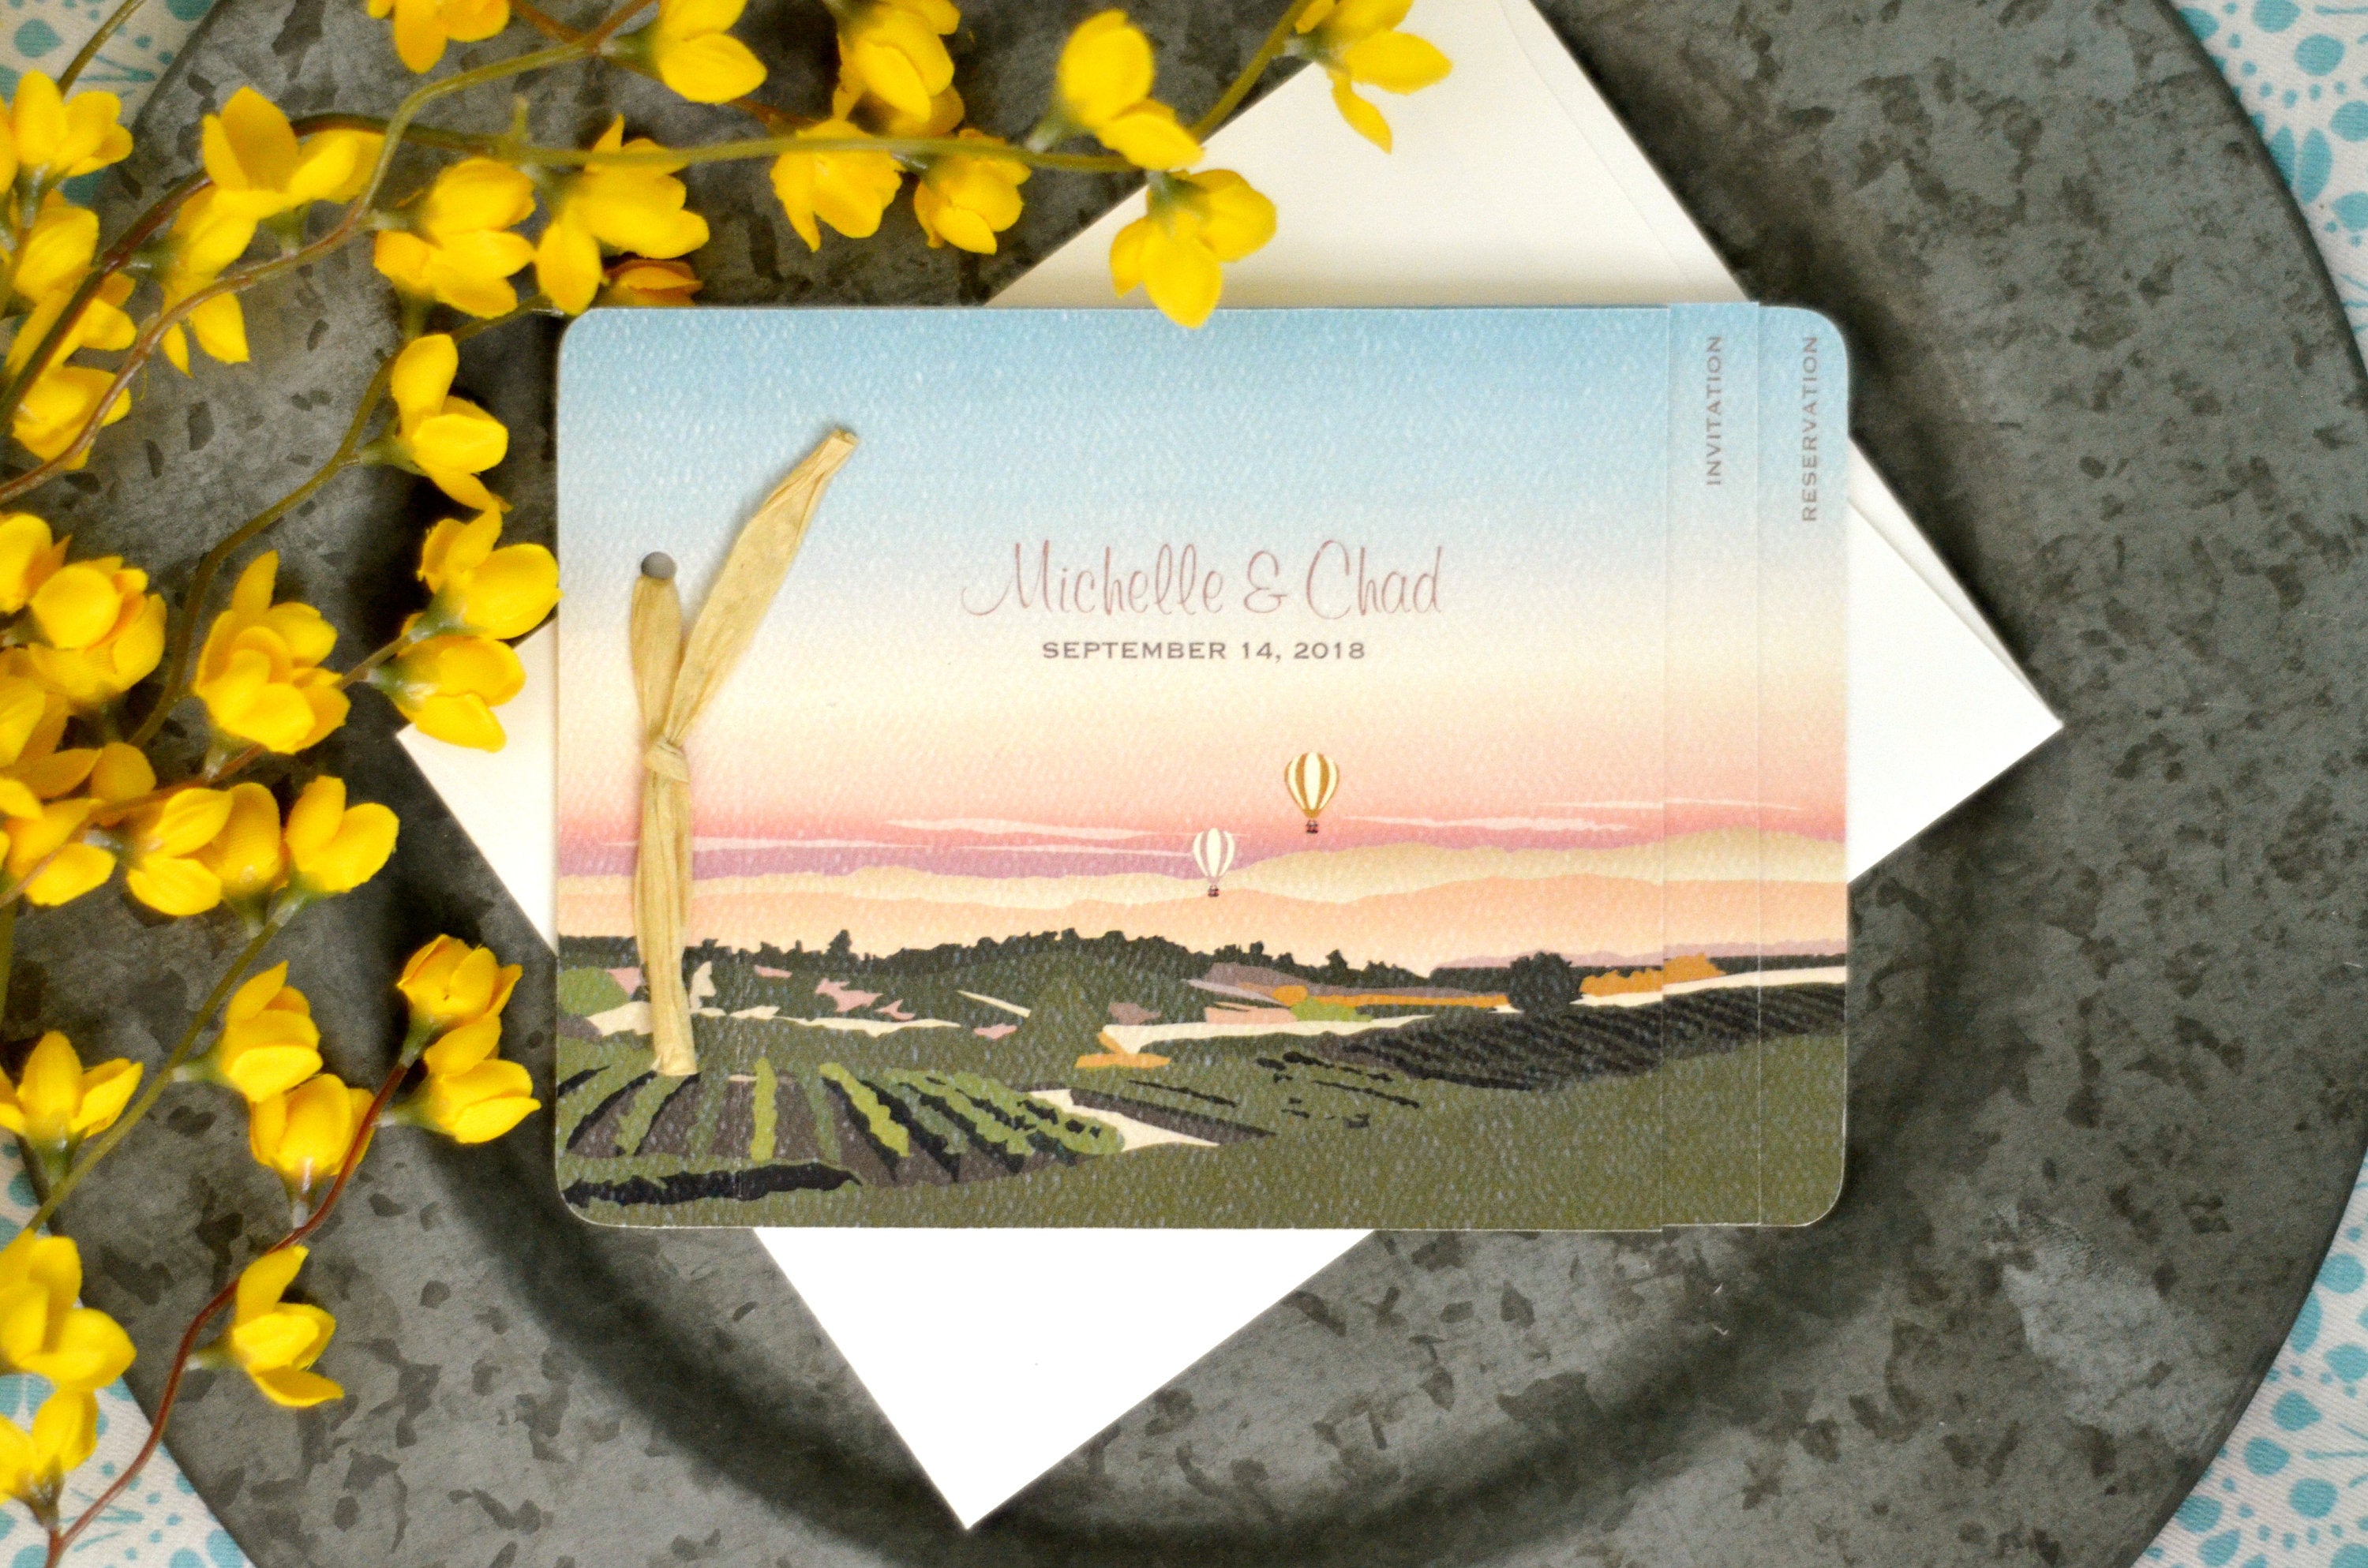 California Vineyard Hot Air Balloon Landscape with Sunset Wedding Livret 3pg Booklet Invitation with Envelope and Tear-Off RSVP